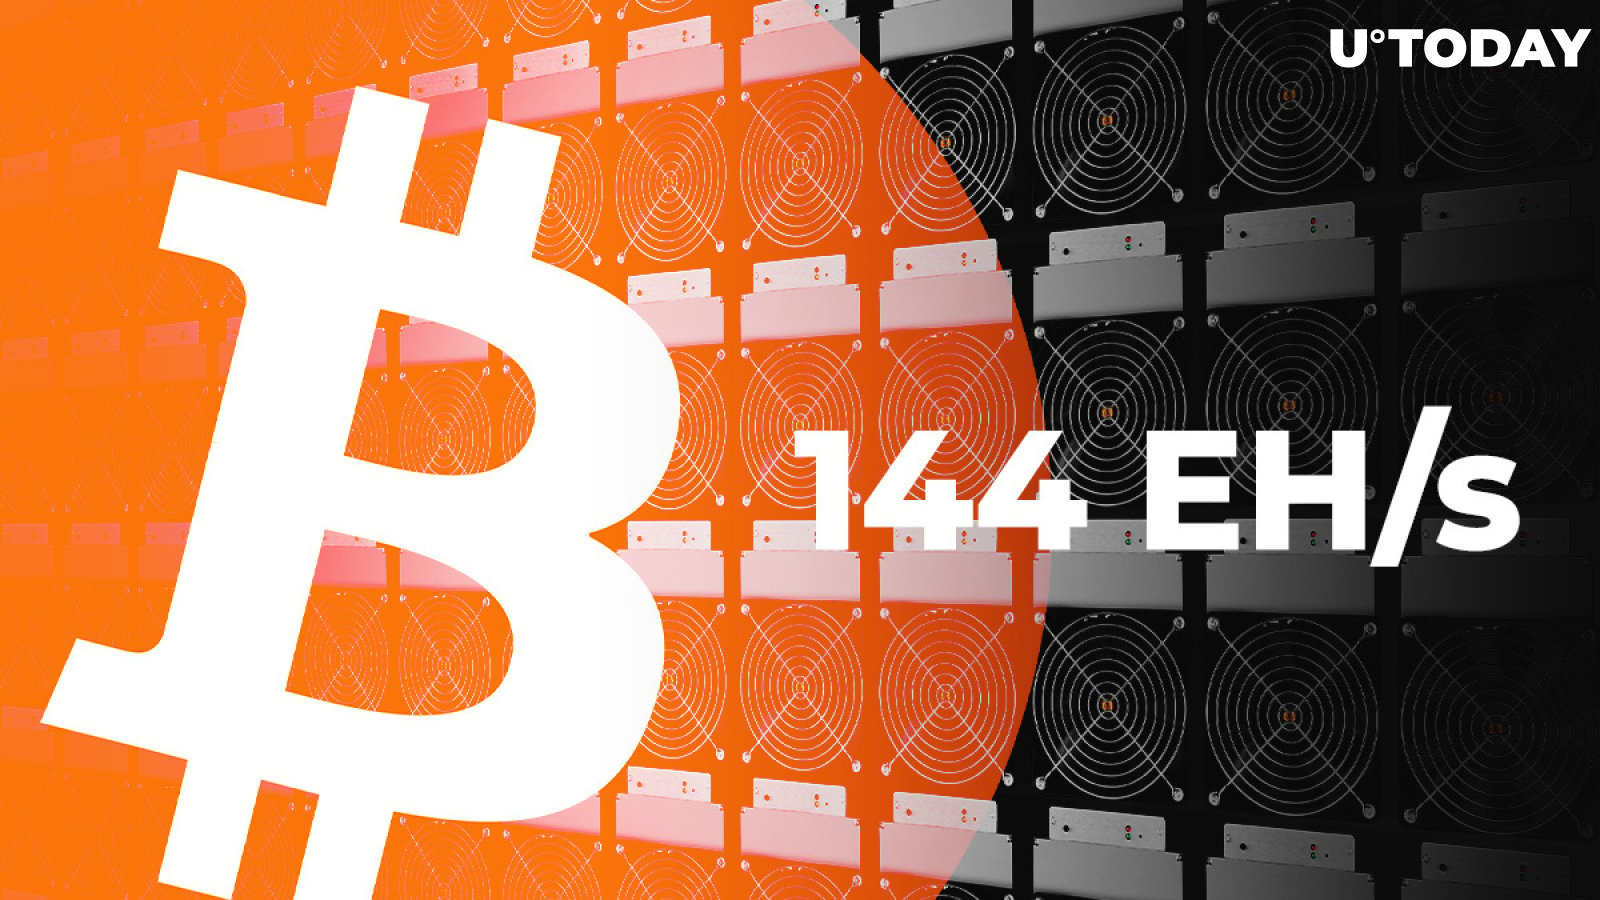 Bitcoin Miners Push Hashrate to New All-Time High of 144 EH/s